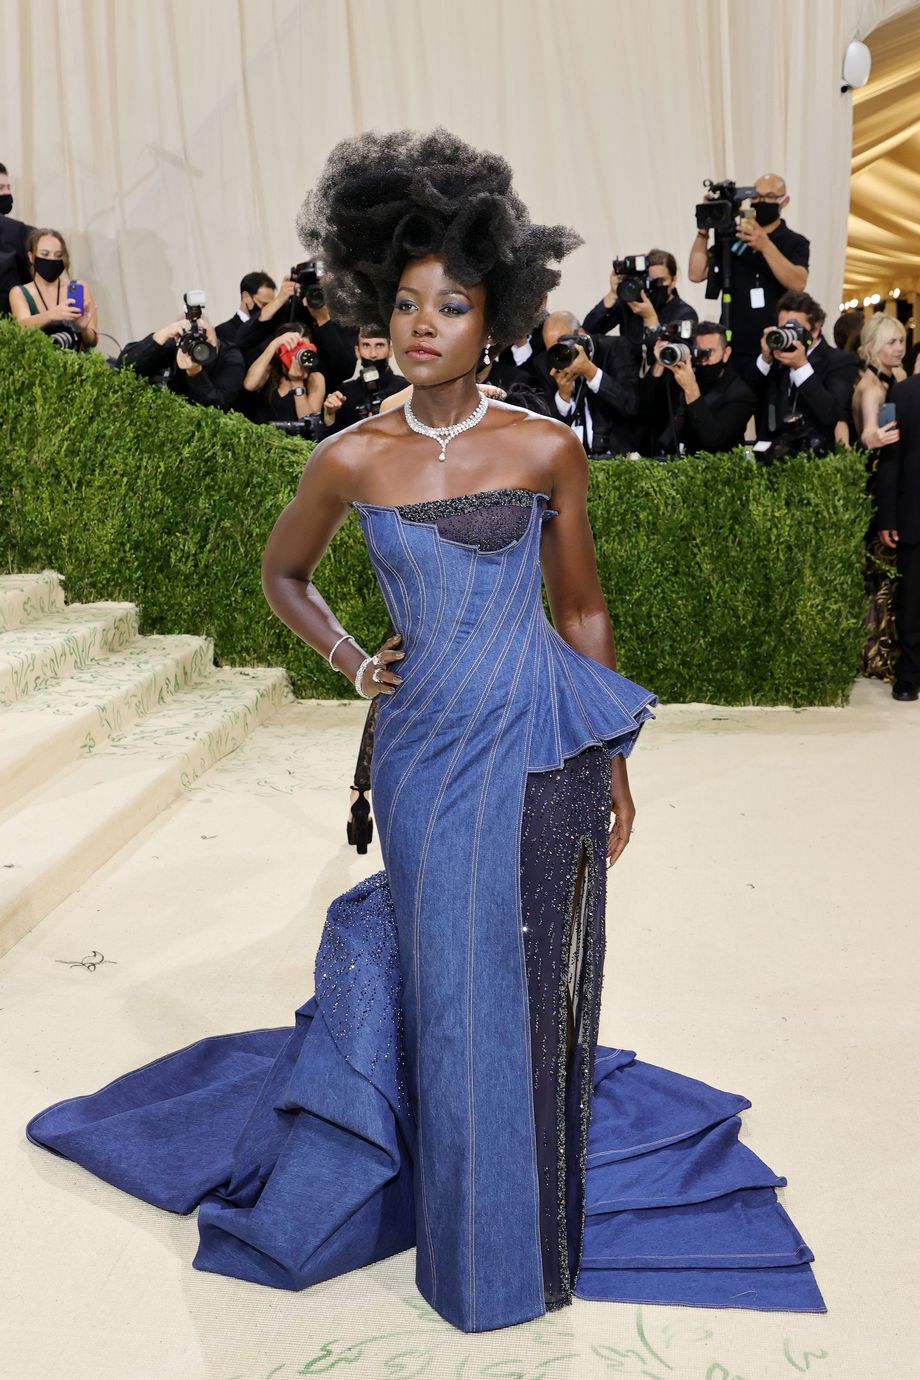 Met Gala 2023 red carpet live: Best, worst and wildest dressed, Photos